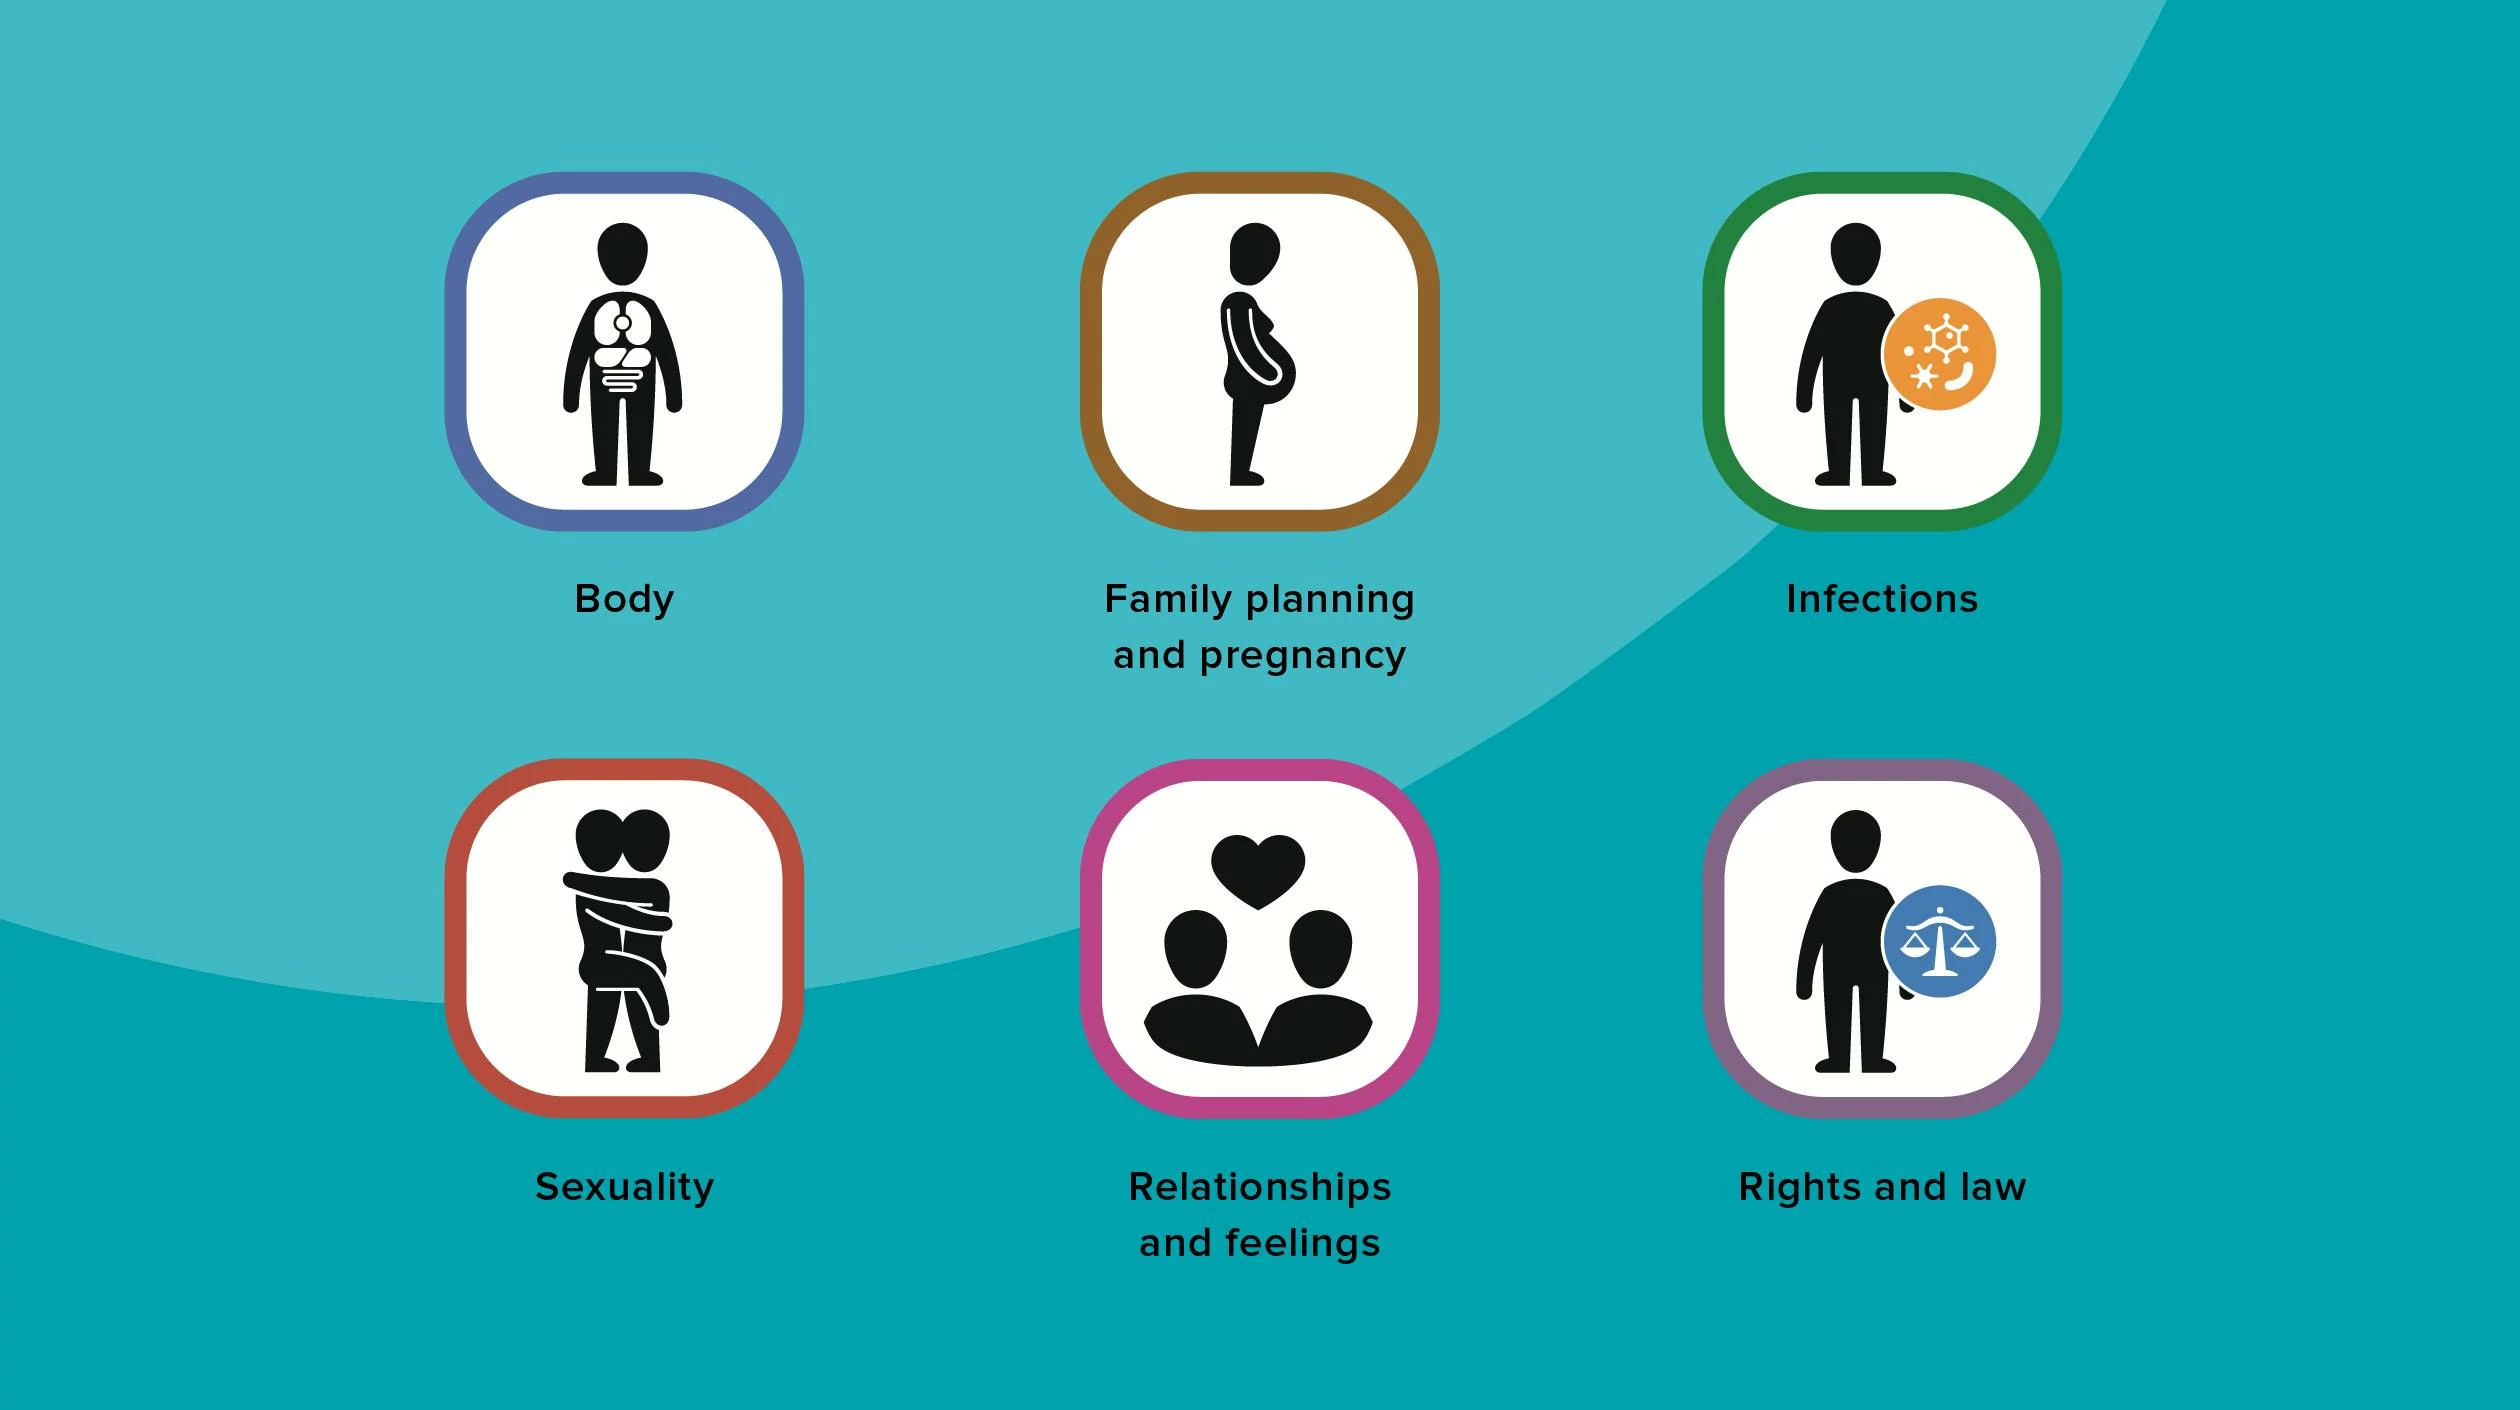 Six symbols with human representations. These represent the content spectrum of ZANZU: Body, family planning and pregnancy, infections, sexuality, relationships and feelings, rights and the law